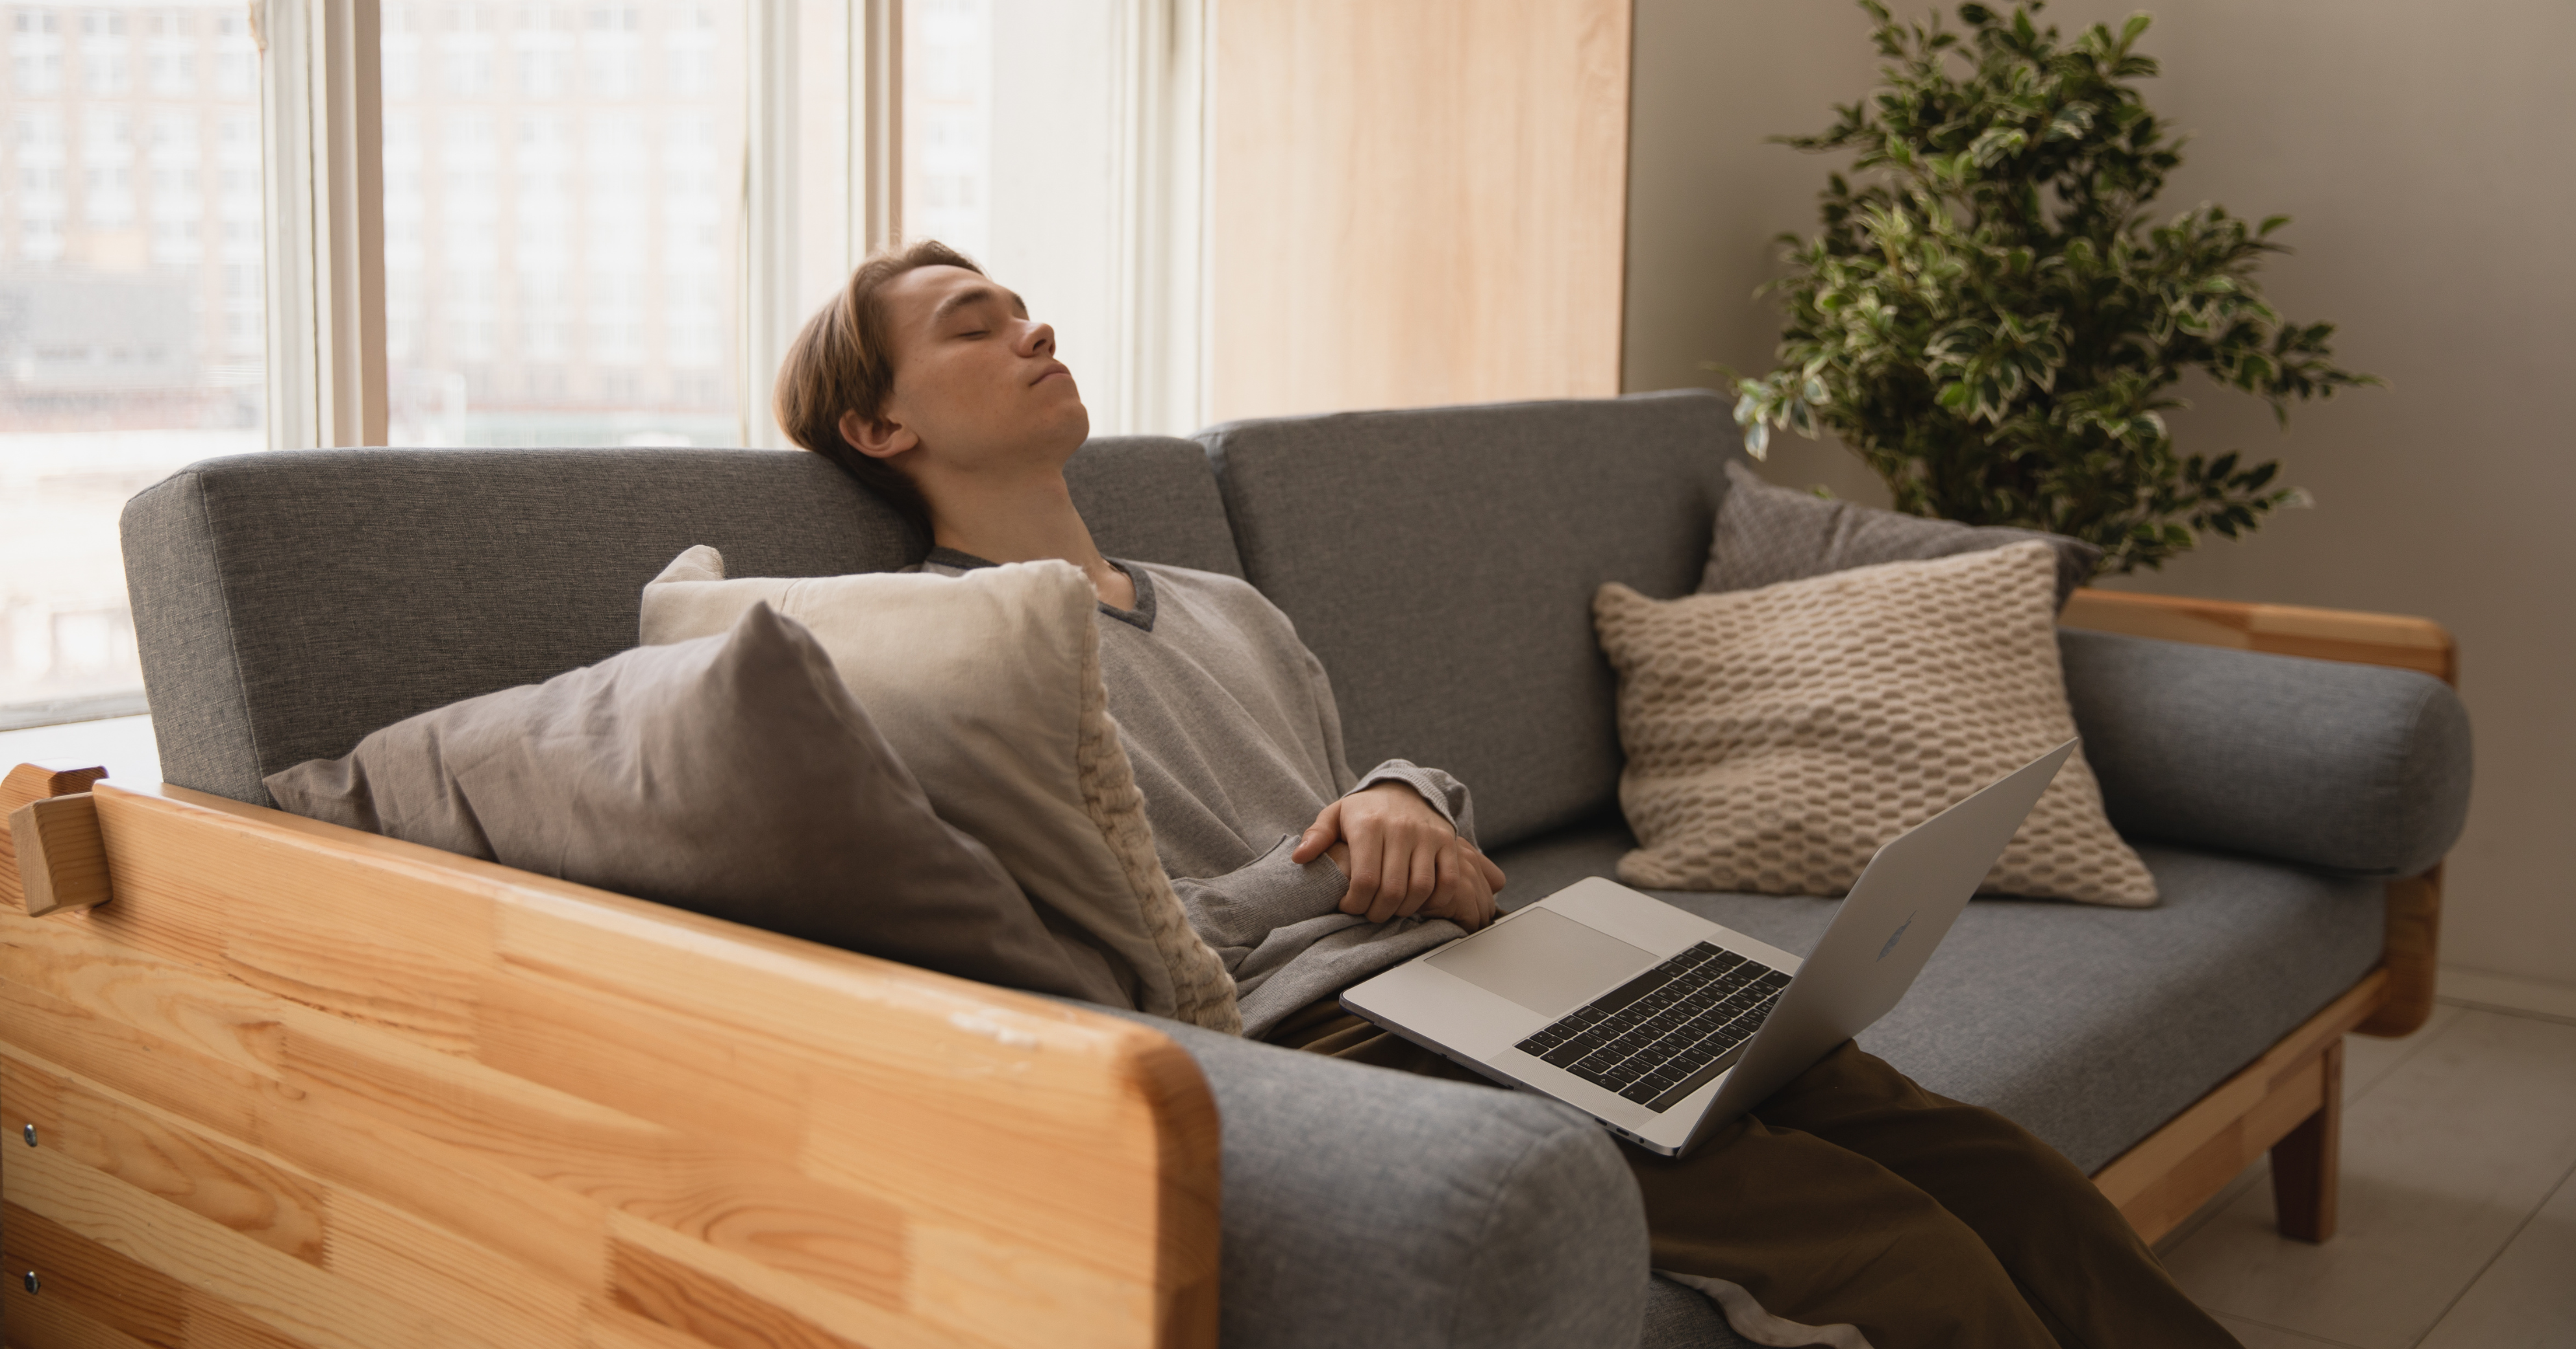 Man tired on sofa with laptop